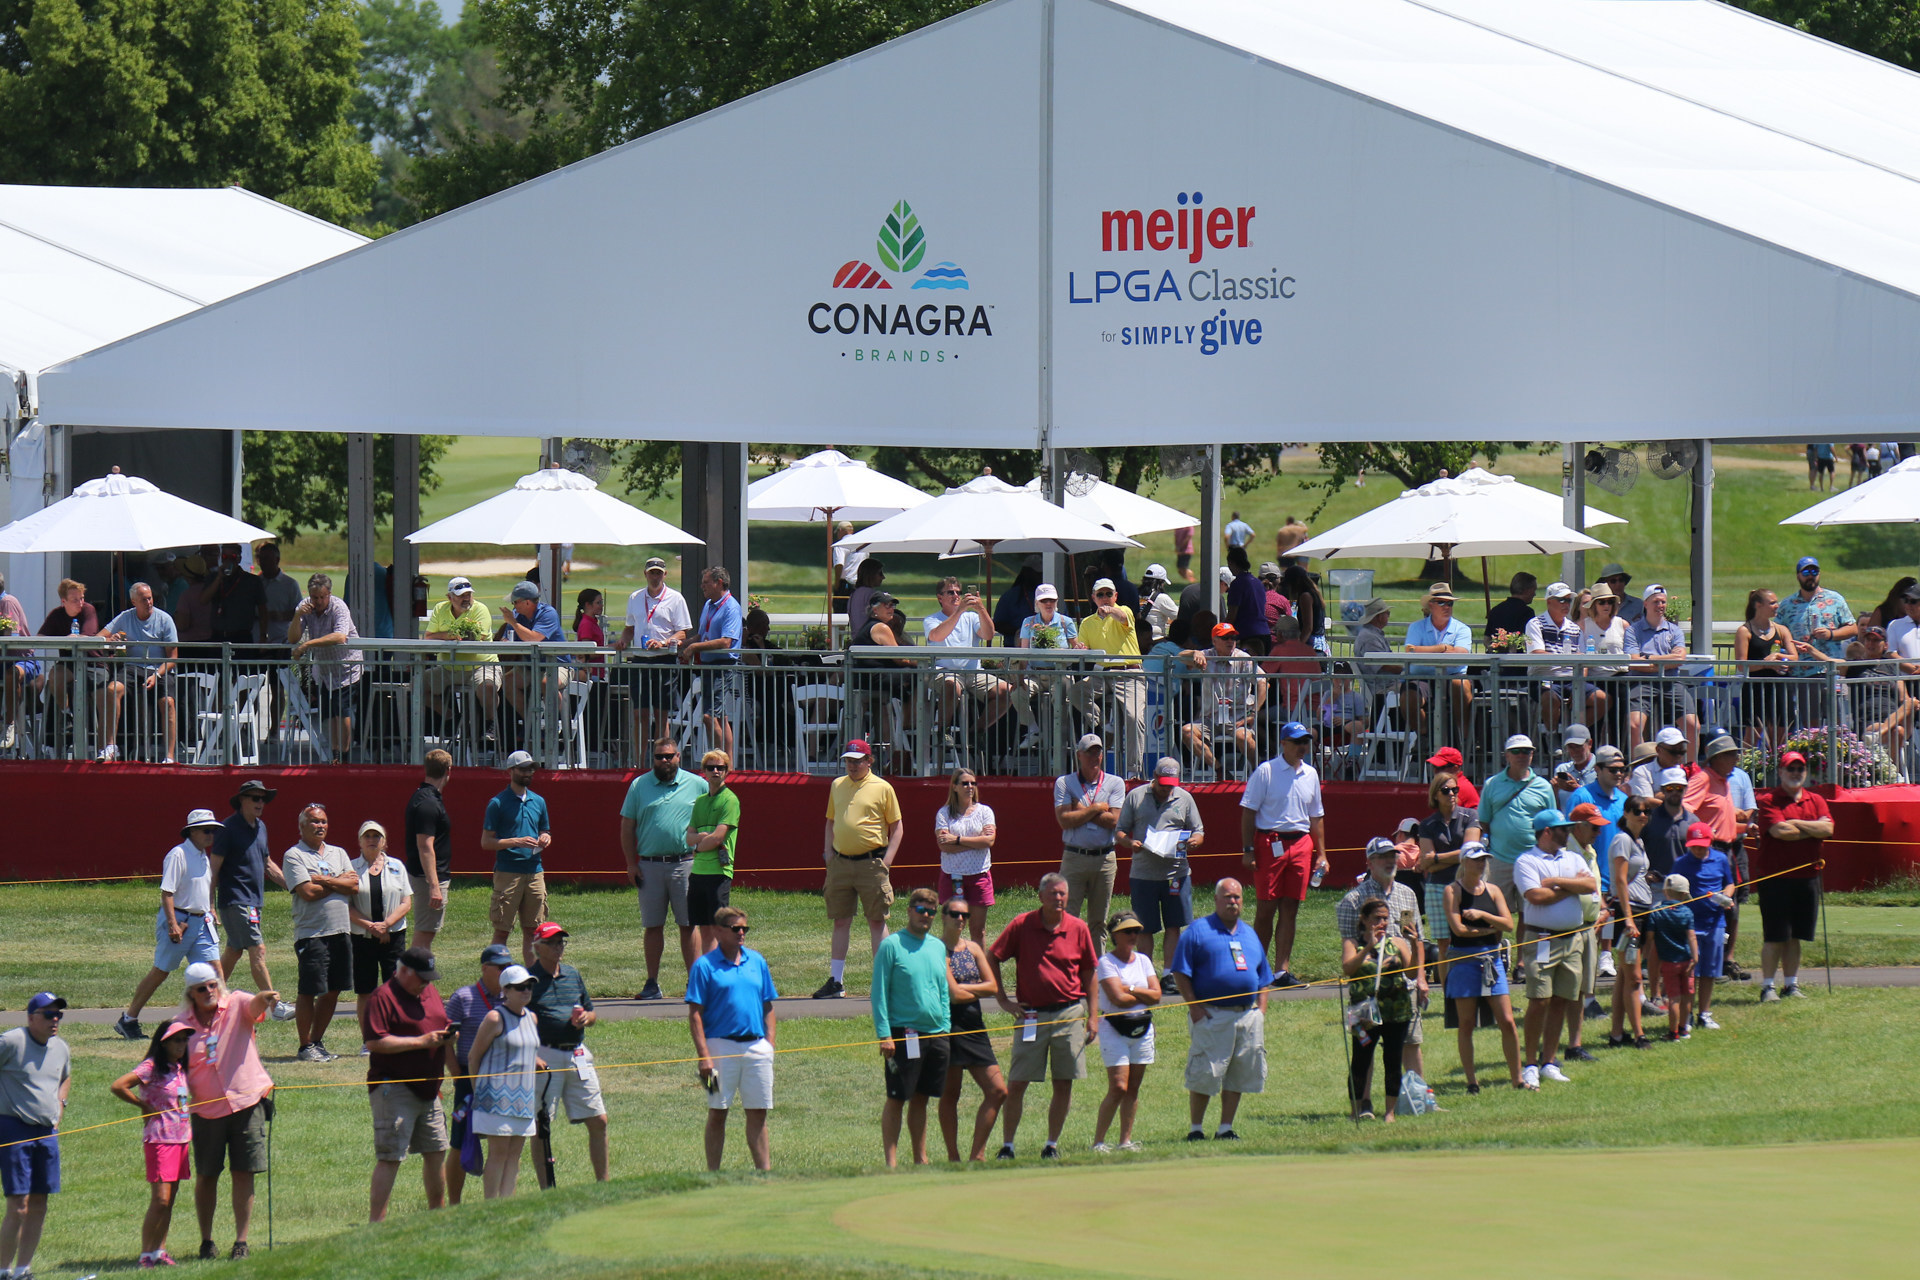 The Meijer LPGA Classic for Simply Give will once again welcome families, foodies, and golf fans from across the Midwest to Grand Rapids, Mich. for an elevated tournament experience June 16-19 at Blythefield Country Club. Tickets can be purchased now at meijerLPGAclassic.com.